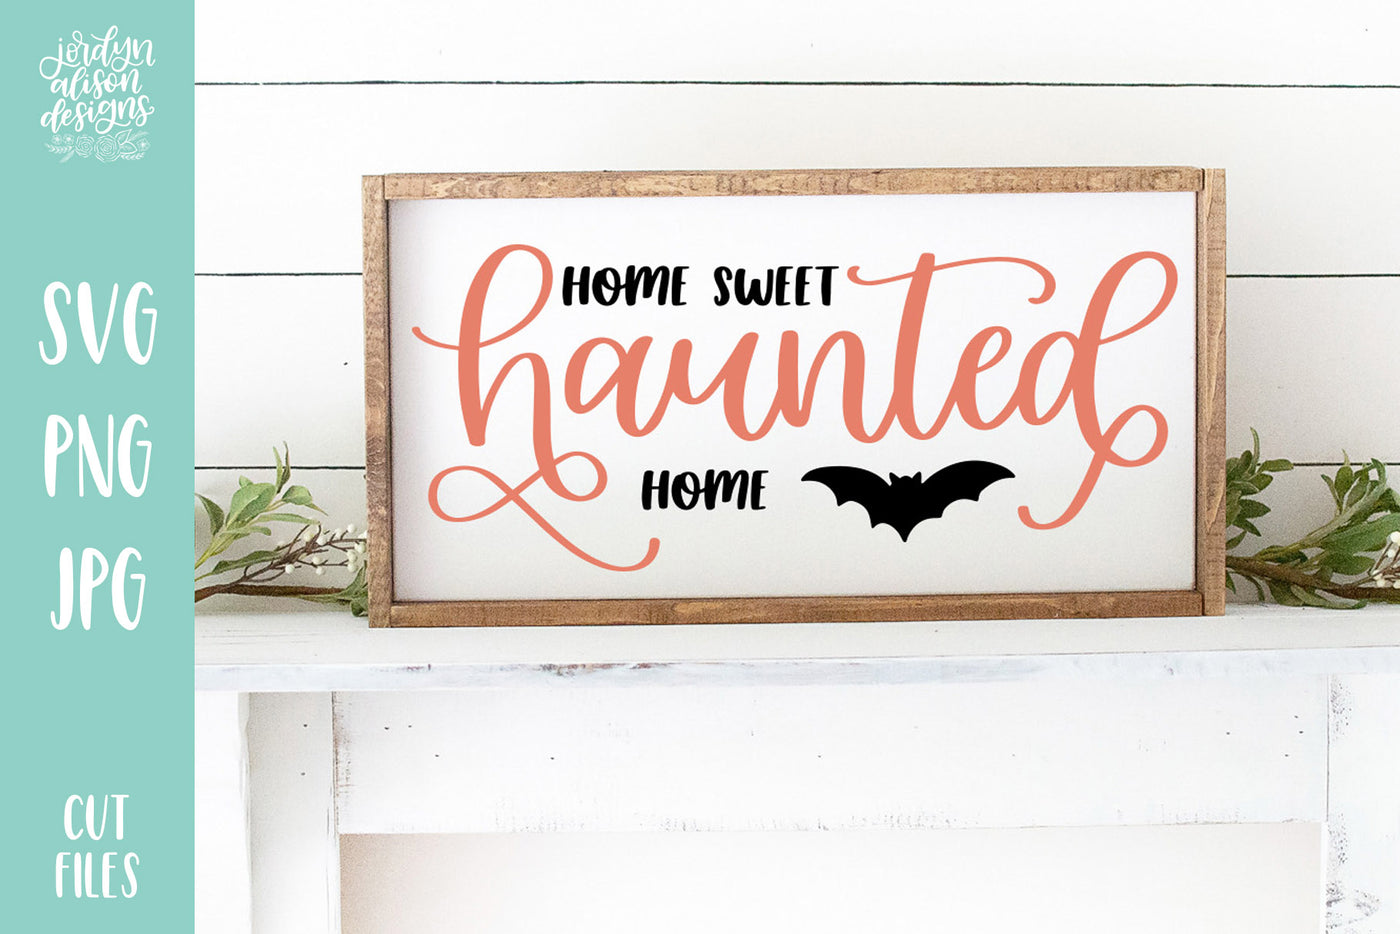 Home Sweet Haunted Home SVG